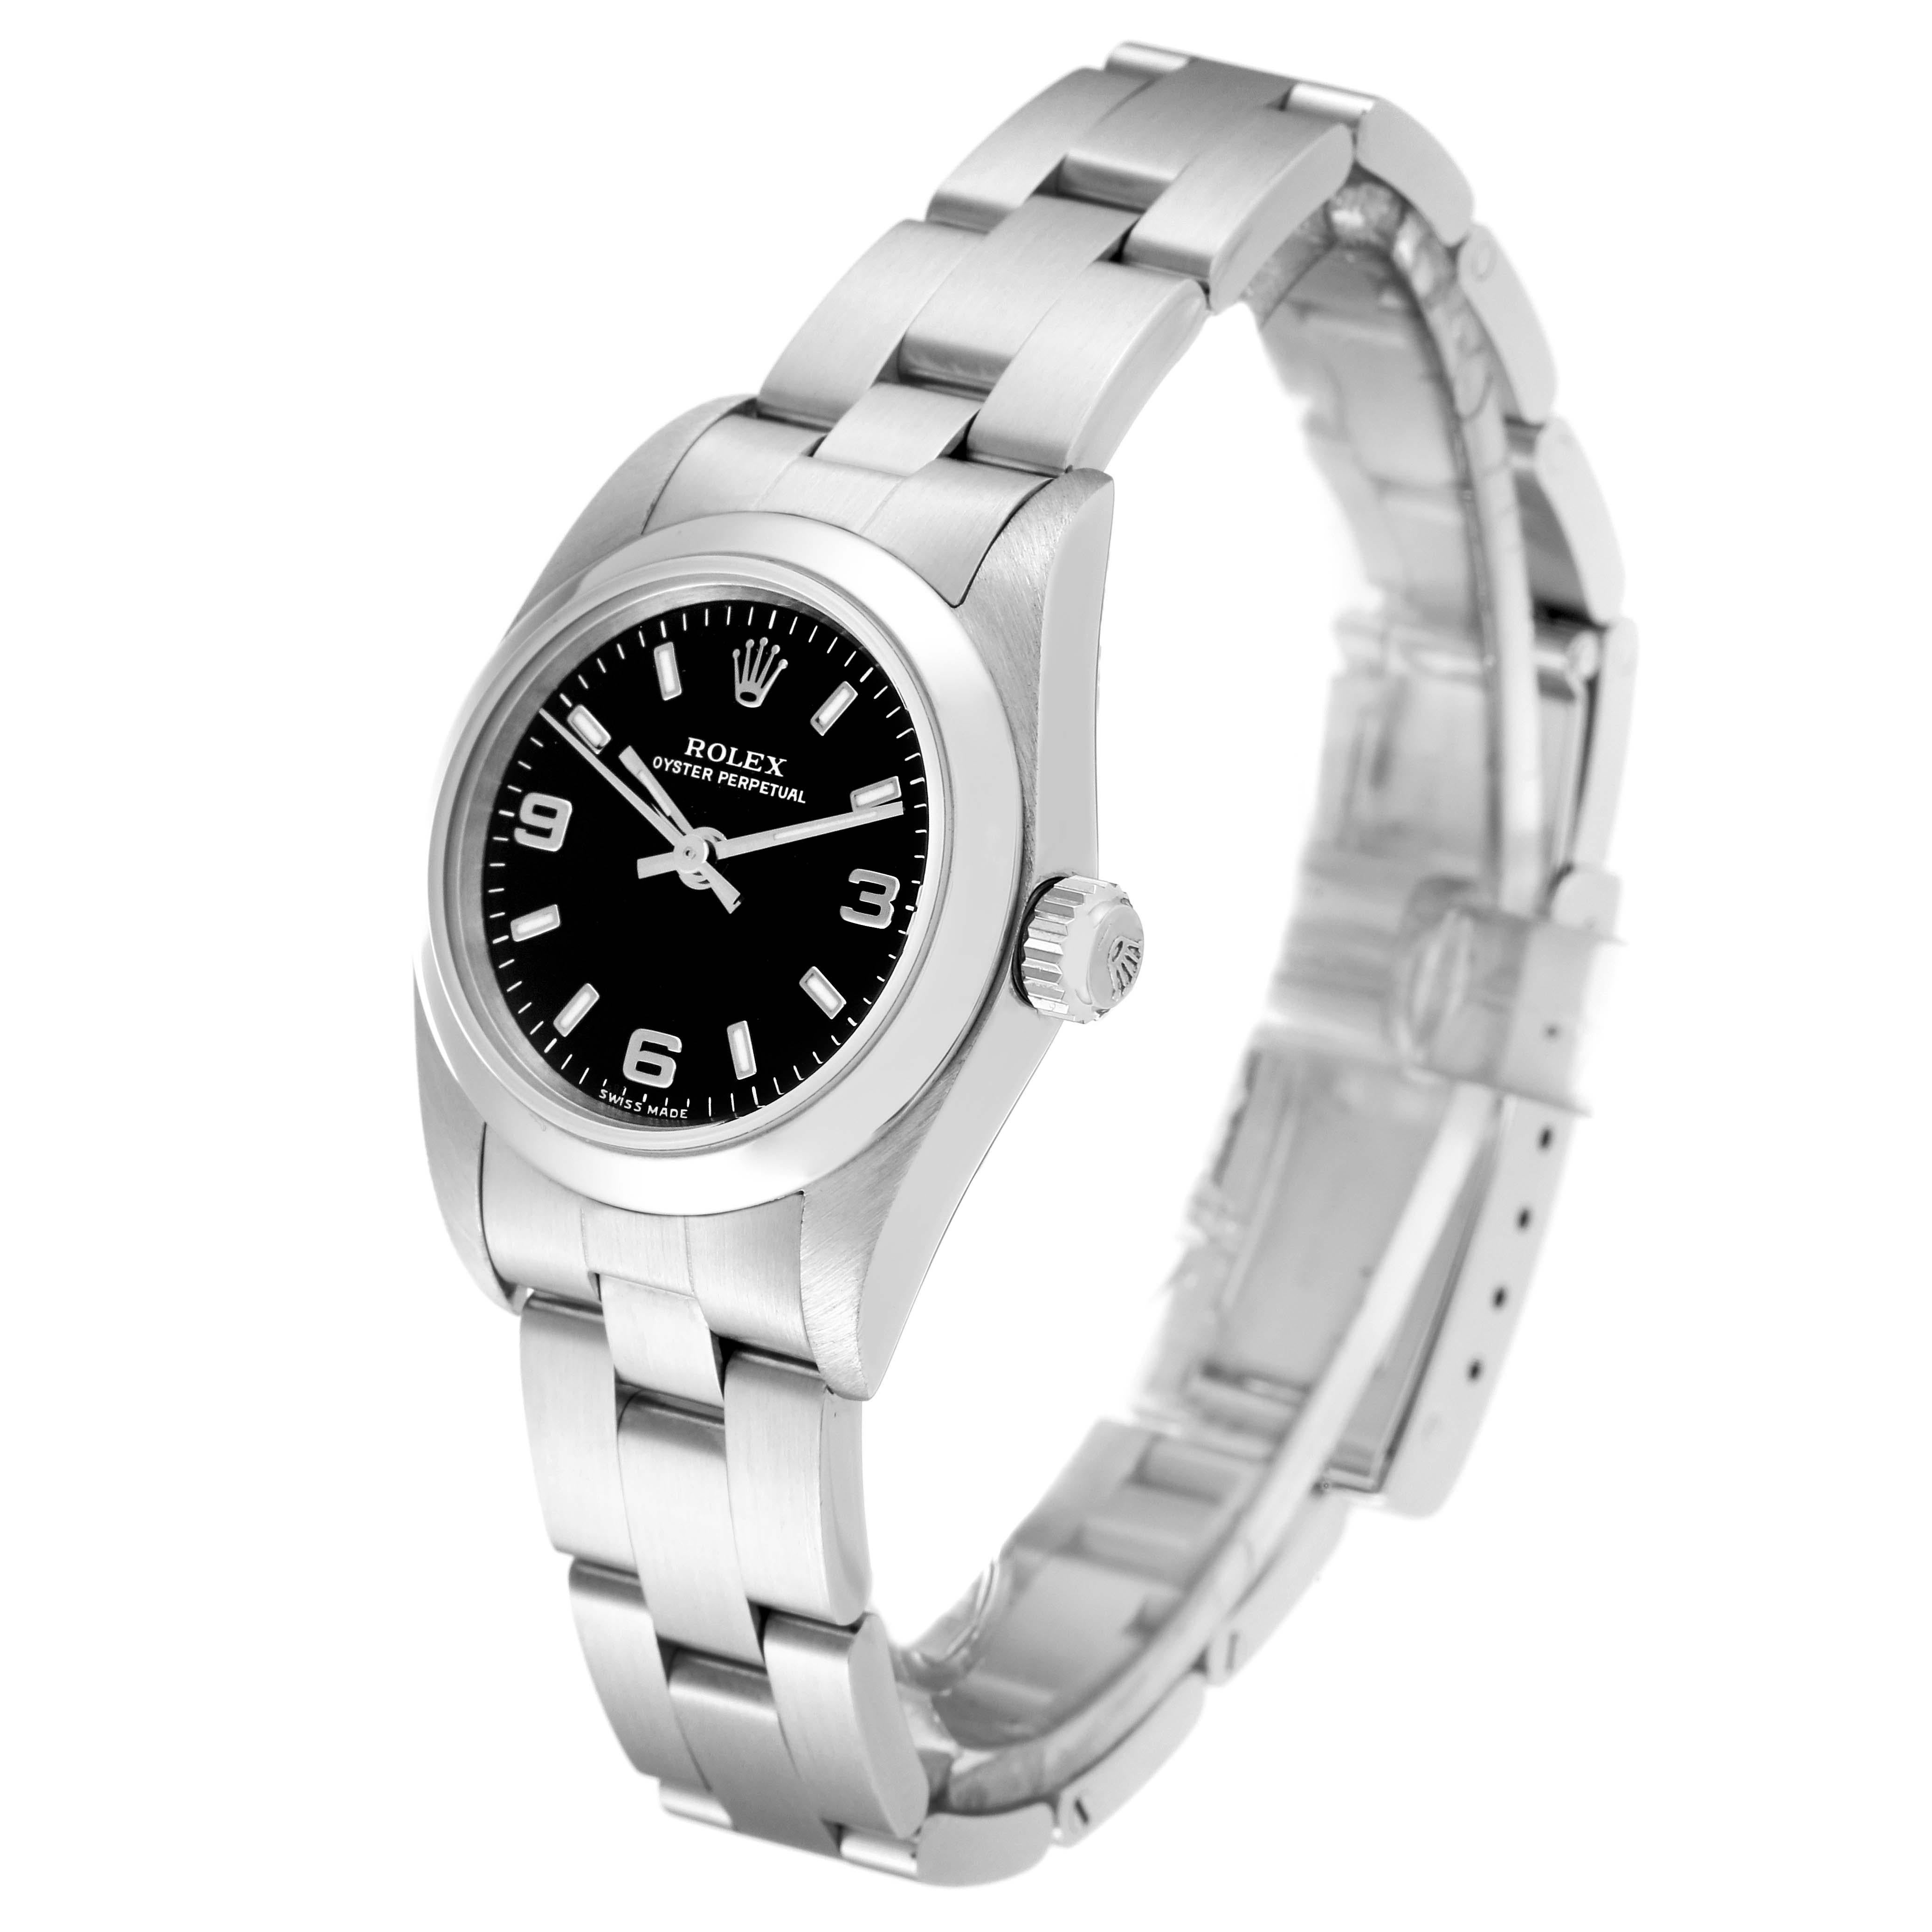 Rolex Oyster Perpetual Nondate Black Dial Steel Ladies Watch 76080 Box Papers 8